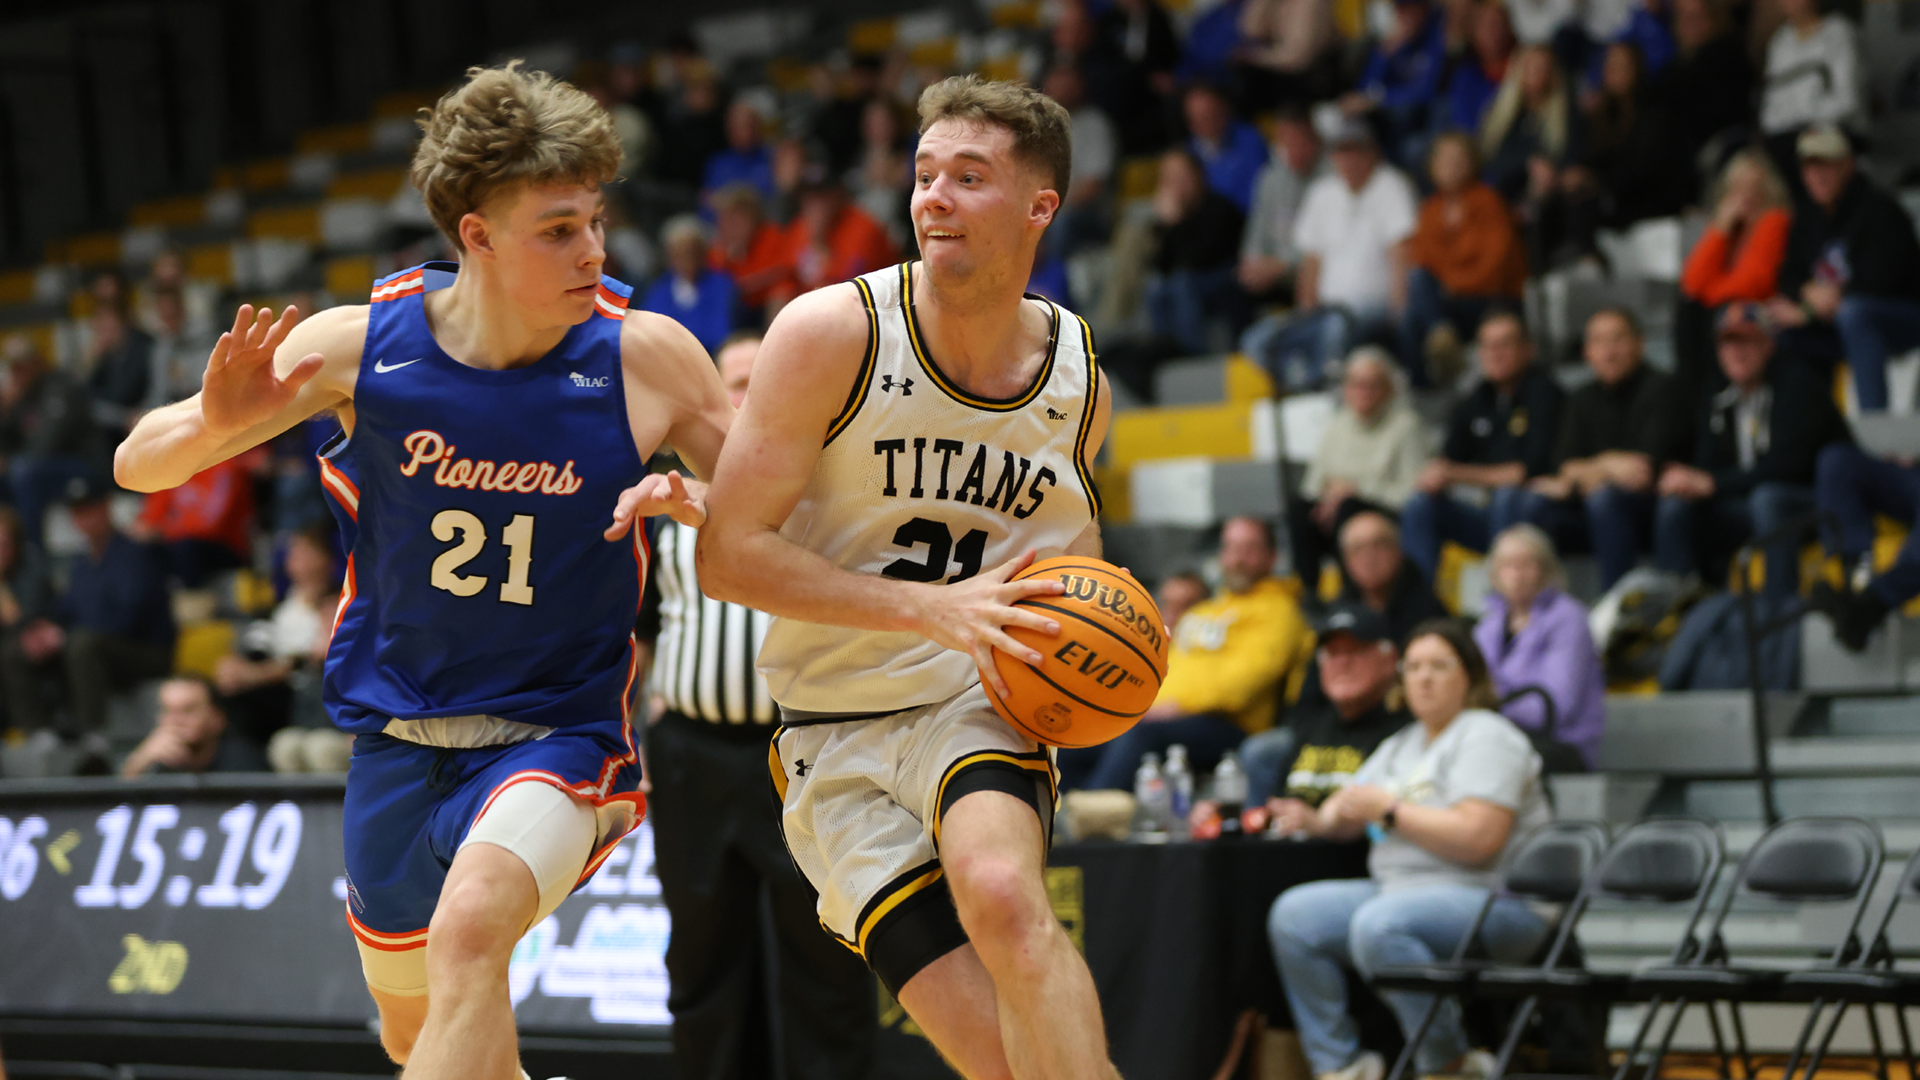 Carter Thomas scored 17 points in the Titans' 77-66 loss to Platteville on Wednesday night